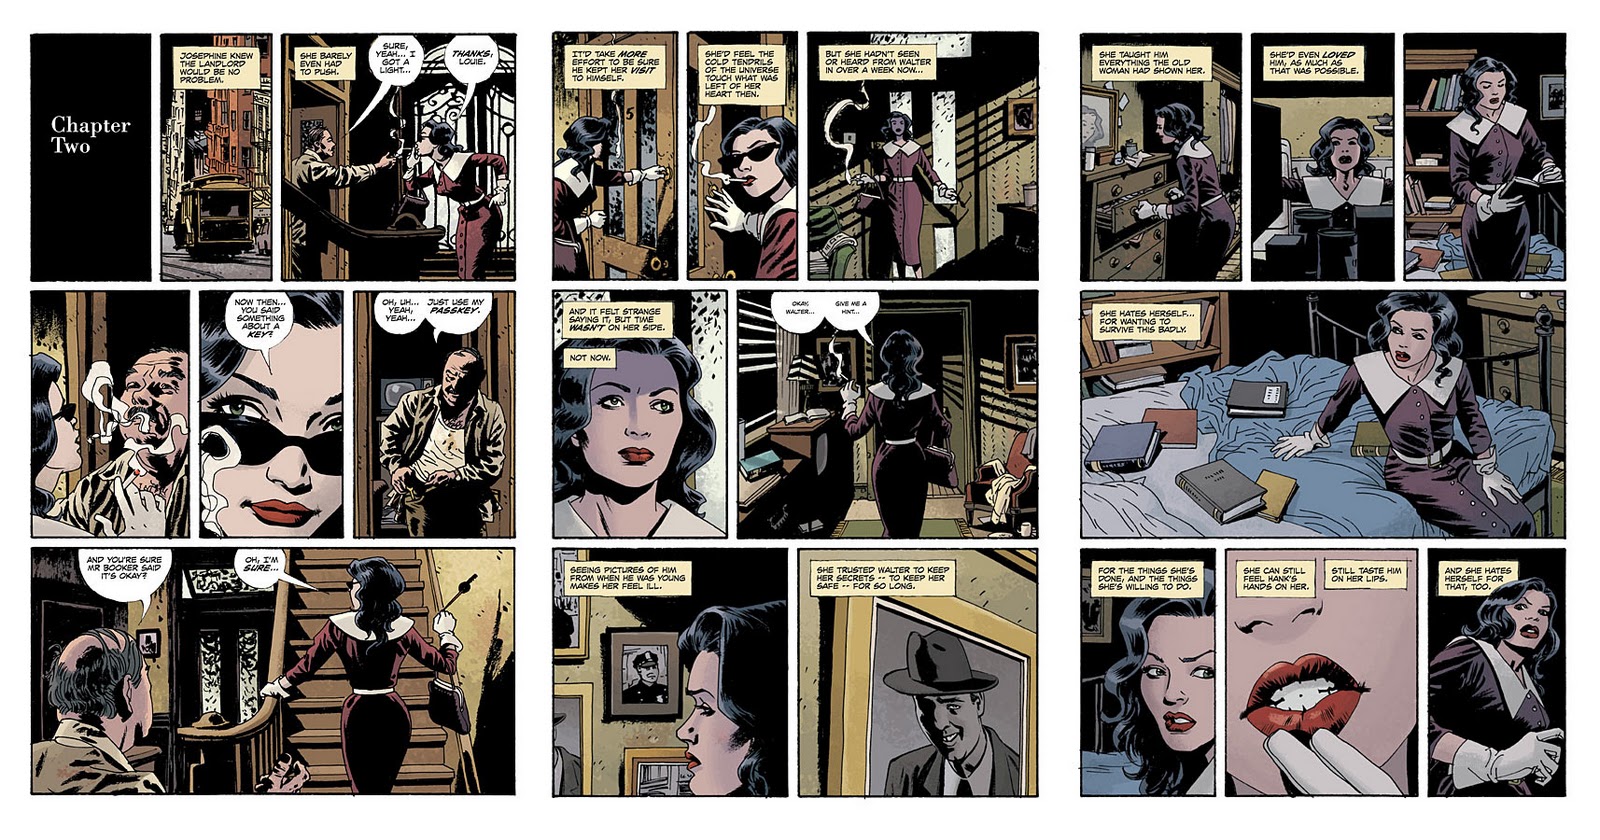 Fatale #2 Chapter 2 Page 1-3 (2012)